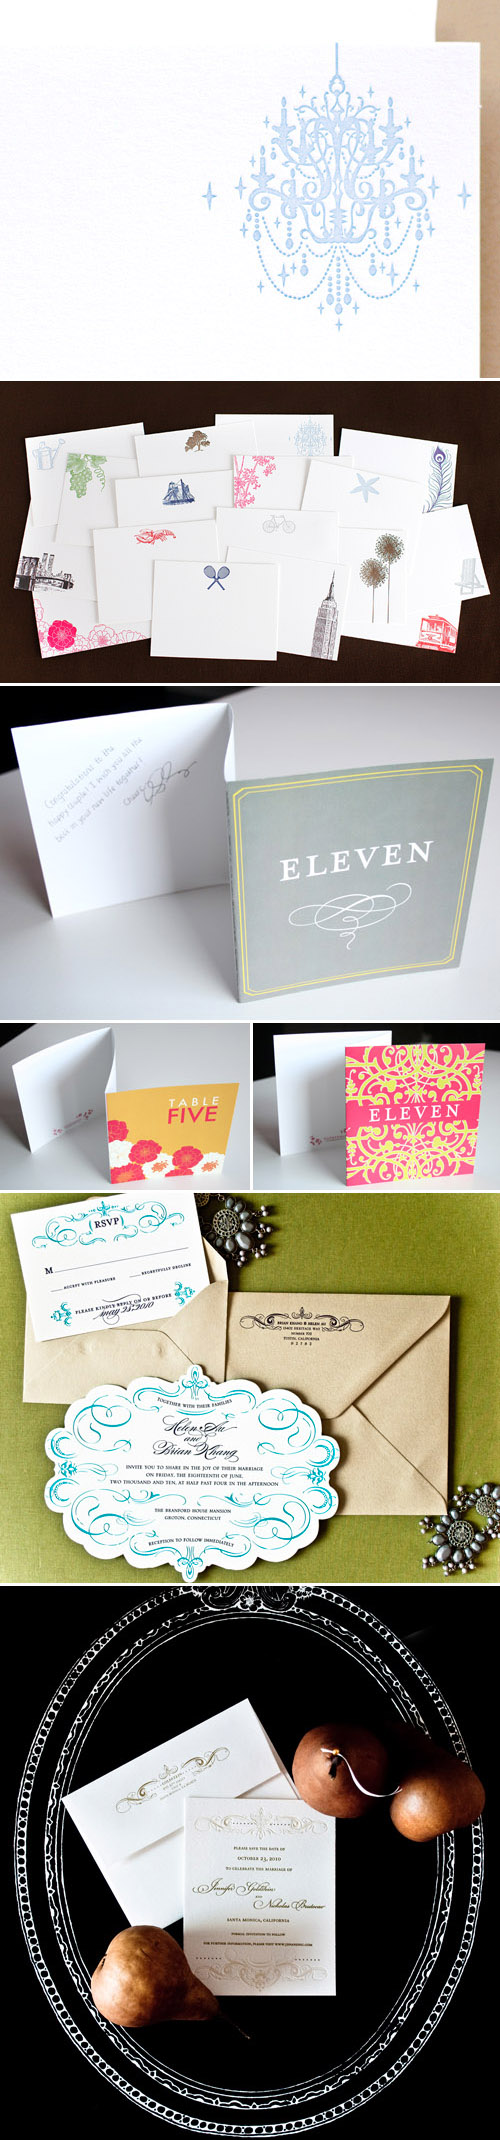 personalized notecards, thank you cards, custom wedding invitations and table numbers from Papeterie